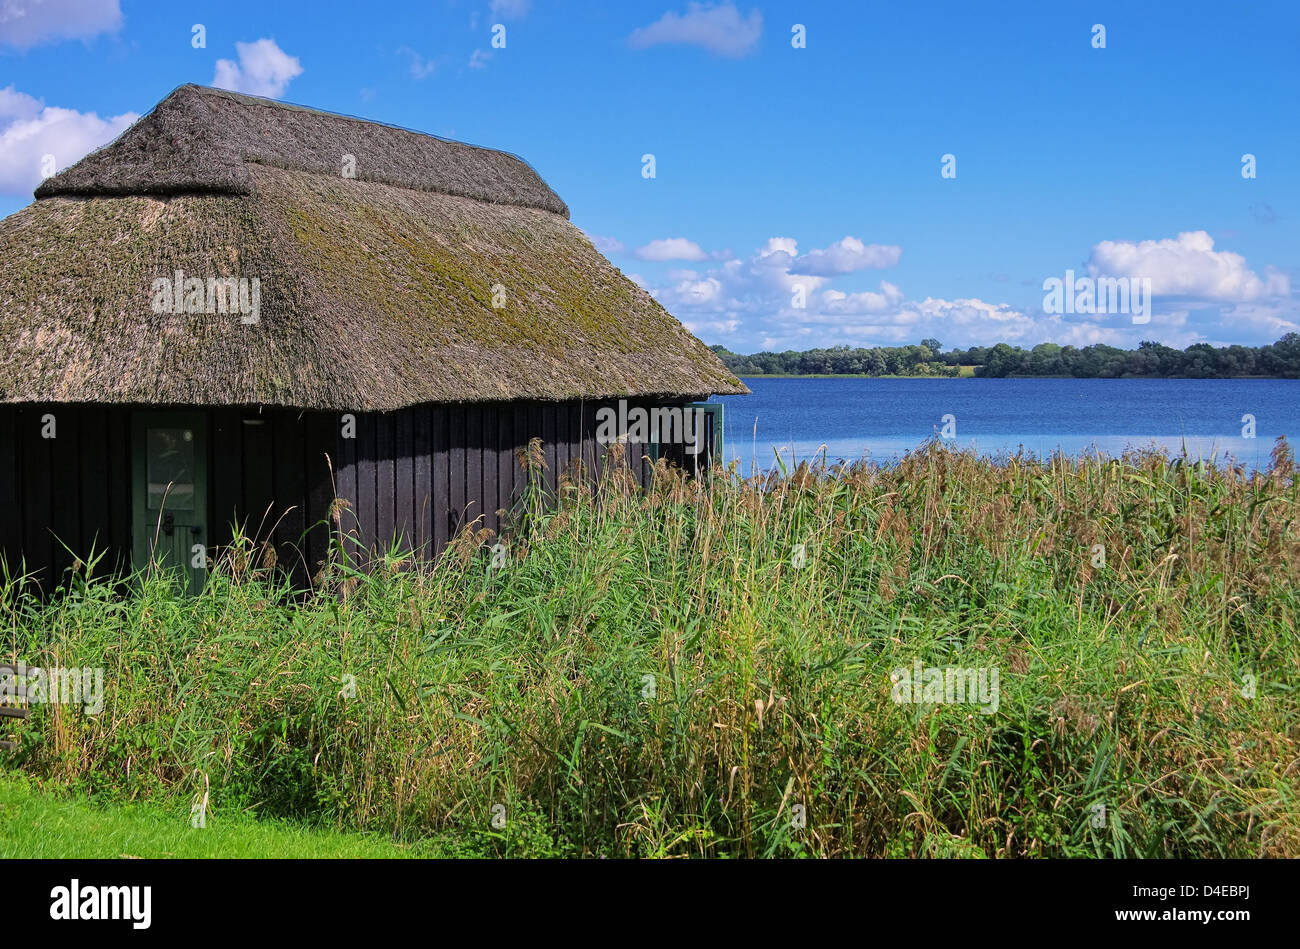 Huette am See - cabin by the lake 02 Stock Photo